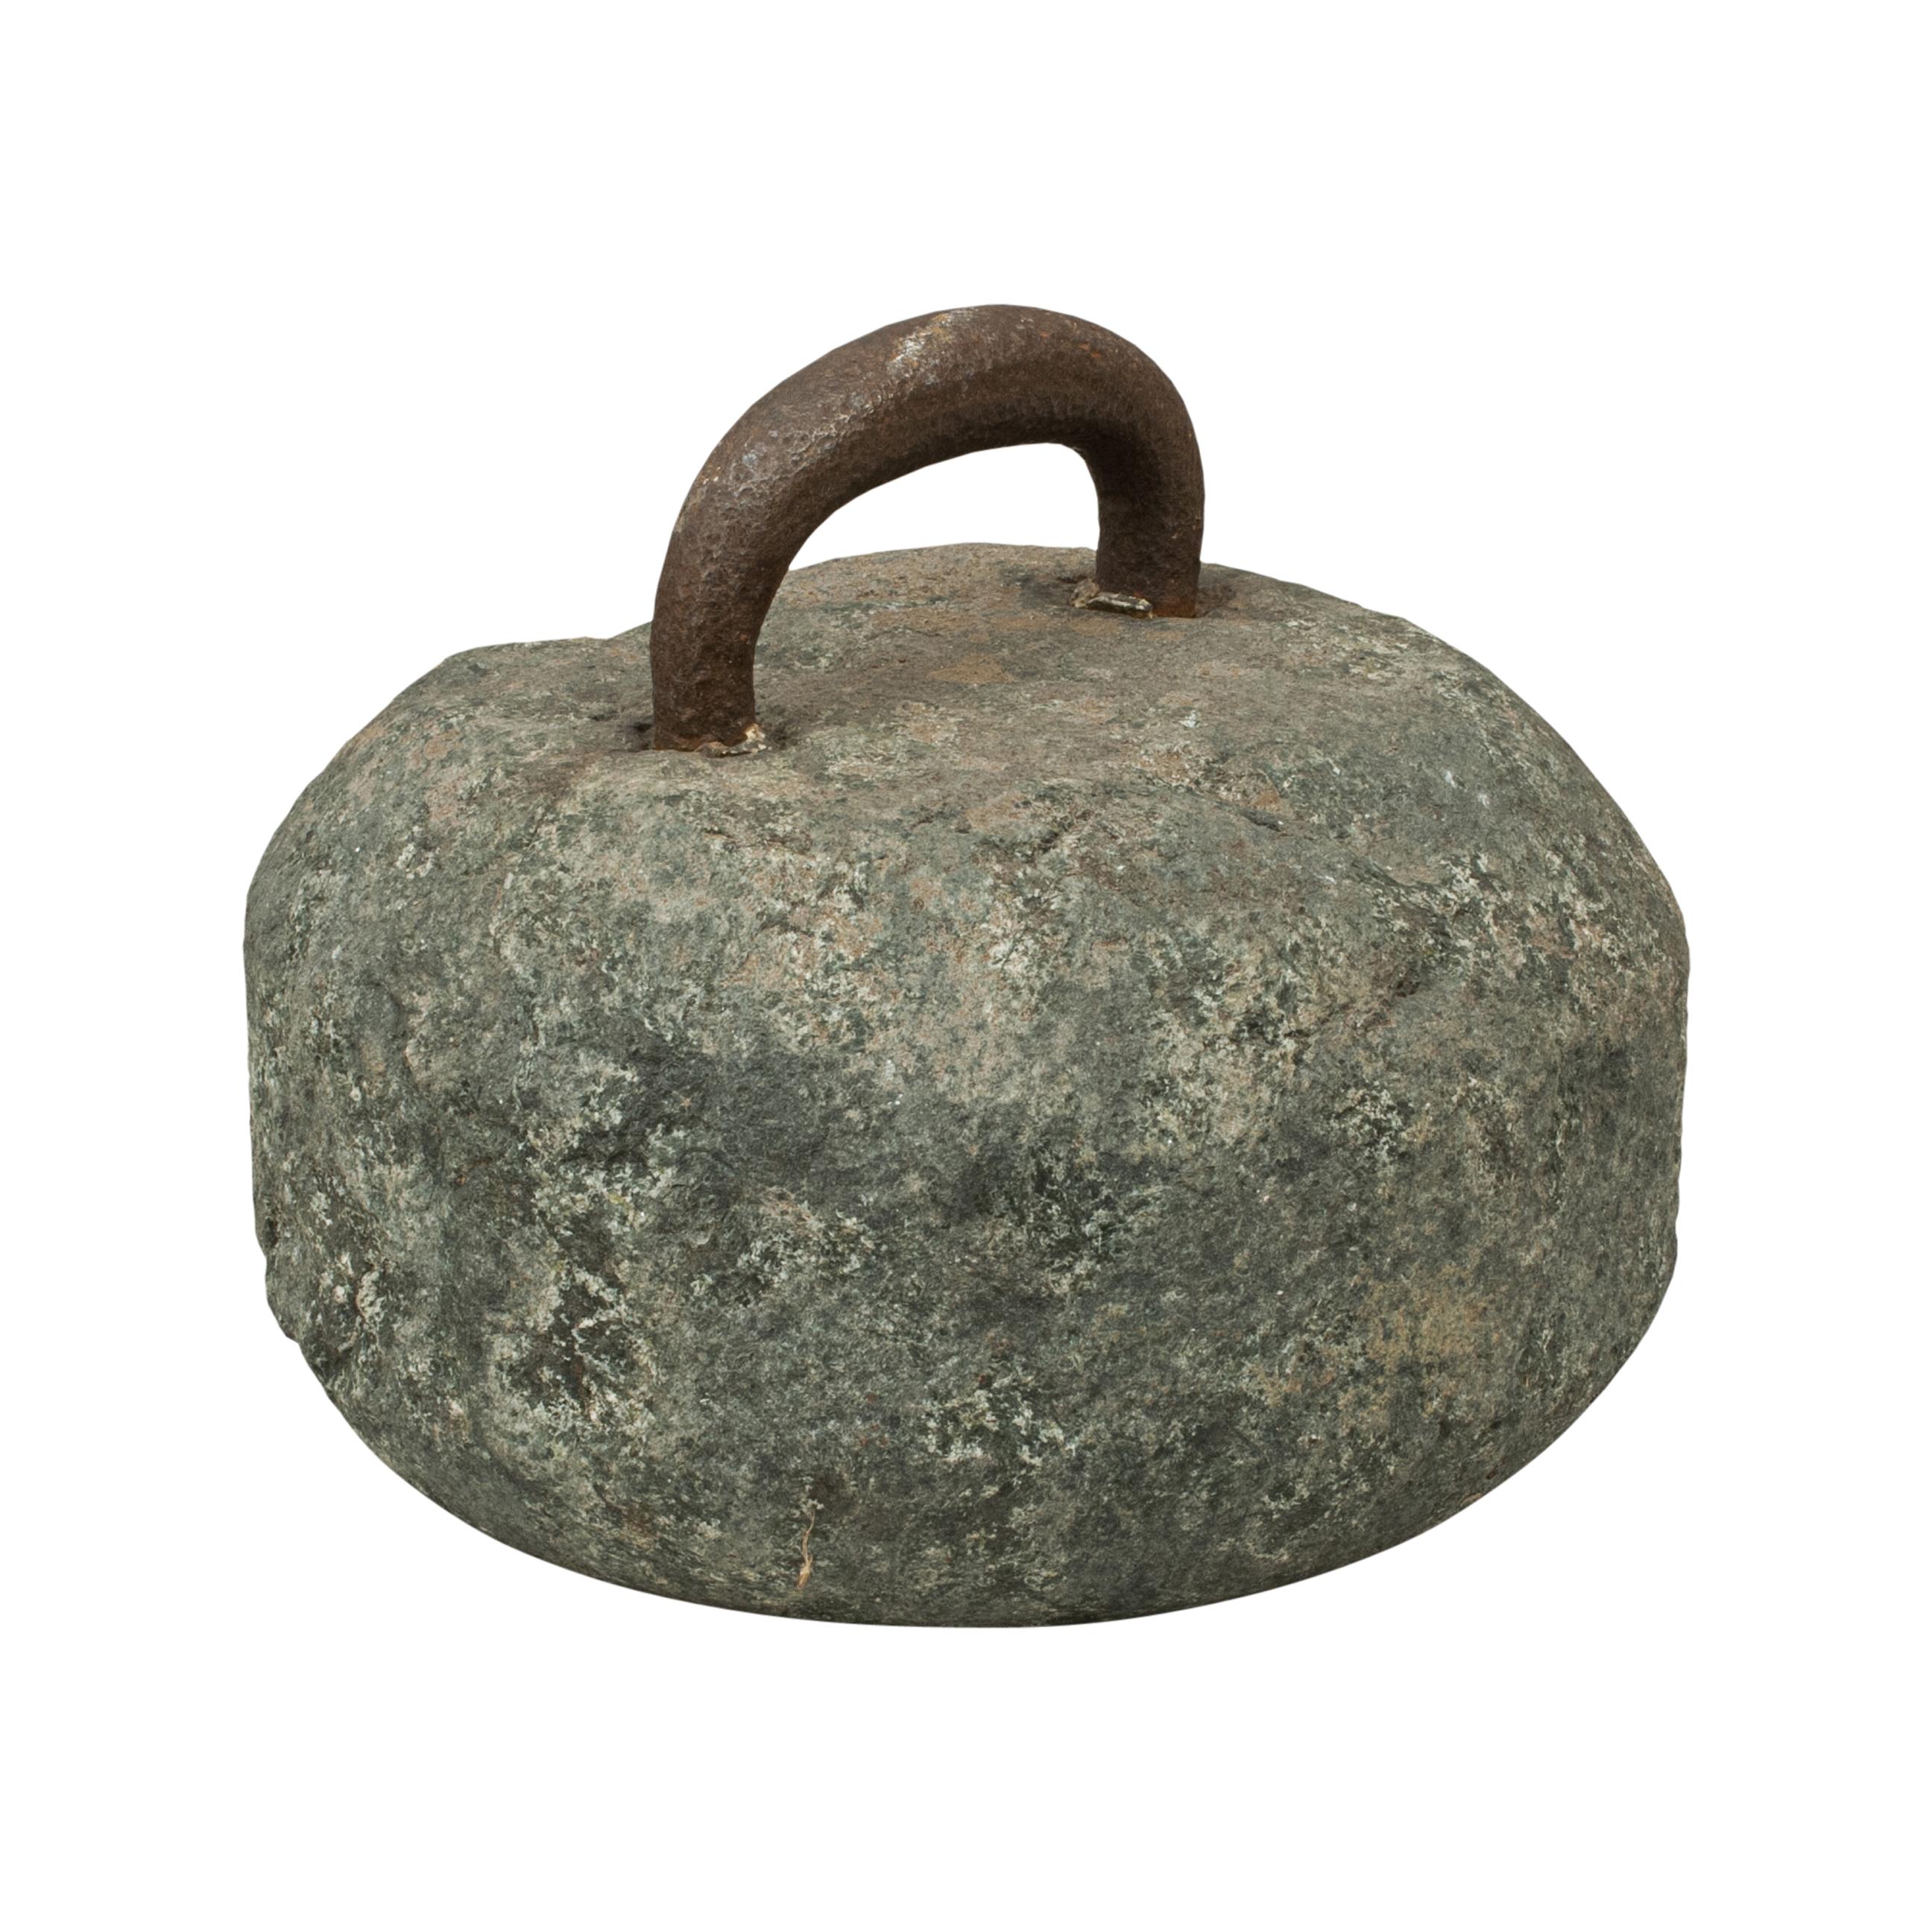 Early antique curling stone.
A fine early single-soled curling stone with a forged iron metal handle. The metal handle is permanently fixed with lead into holes bored into the top of the stone. There is a beautiful roughness to the stone, it is